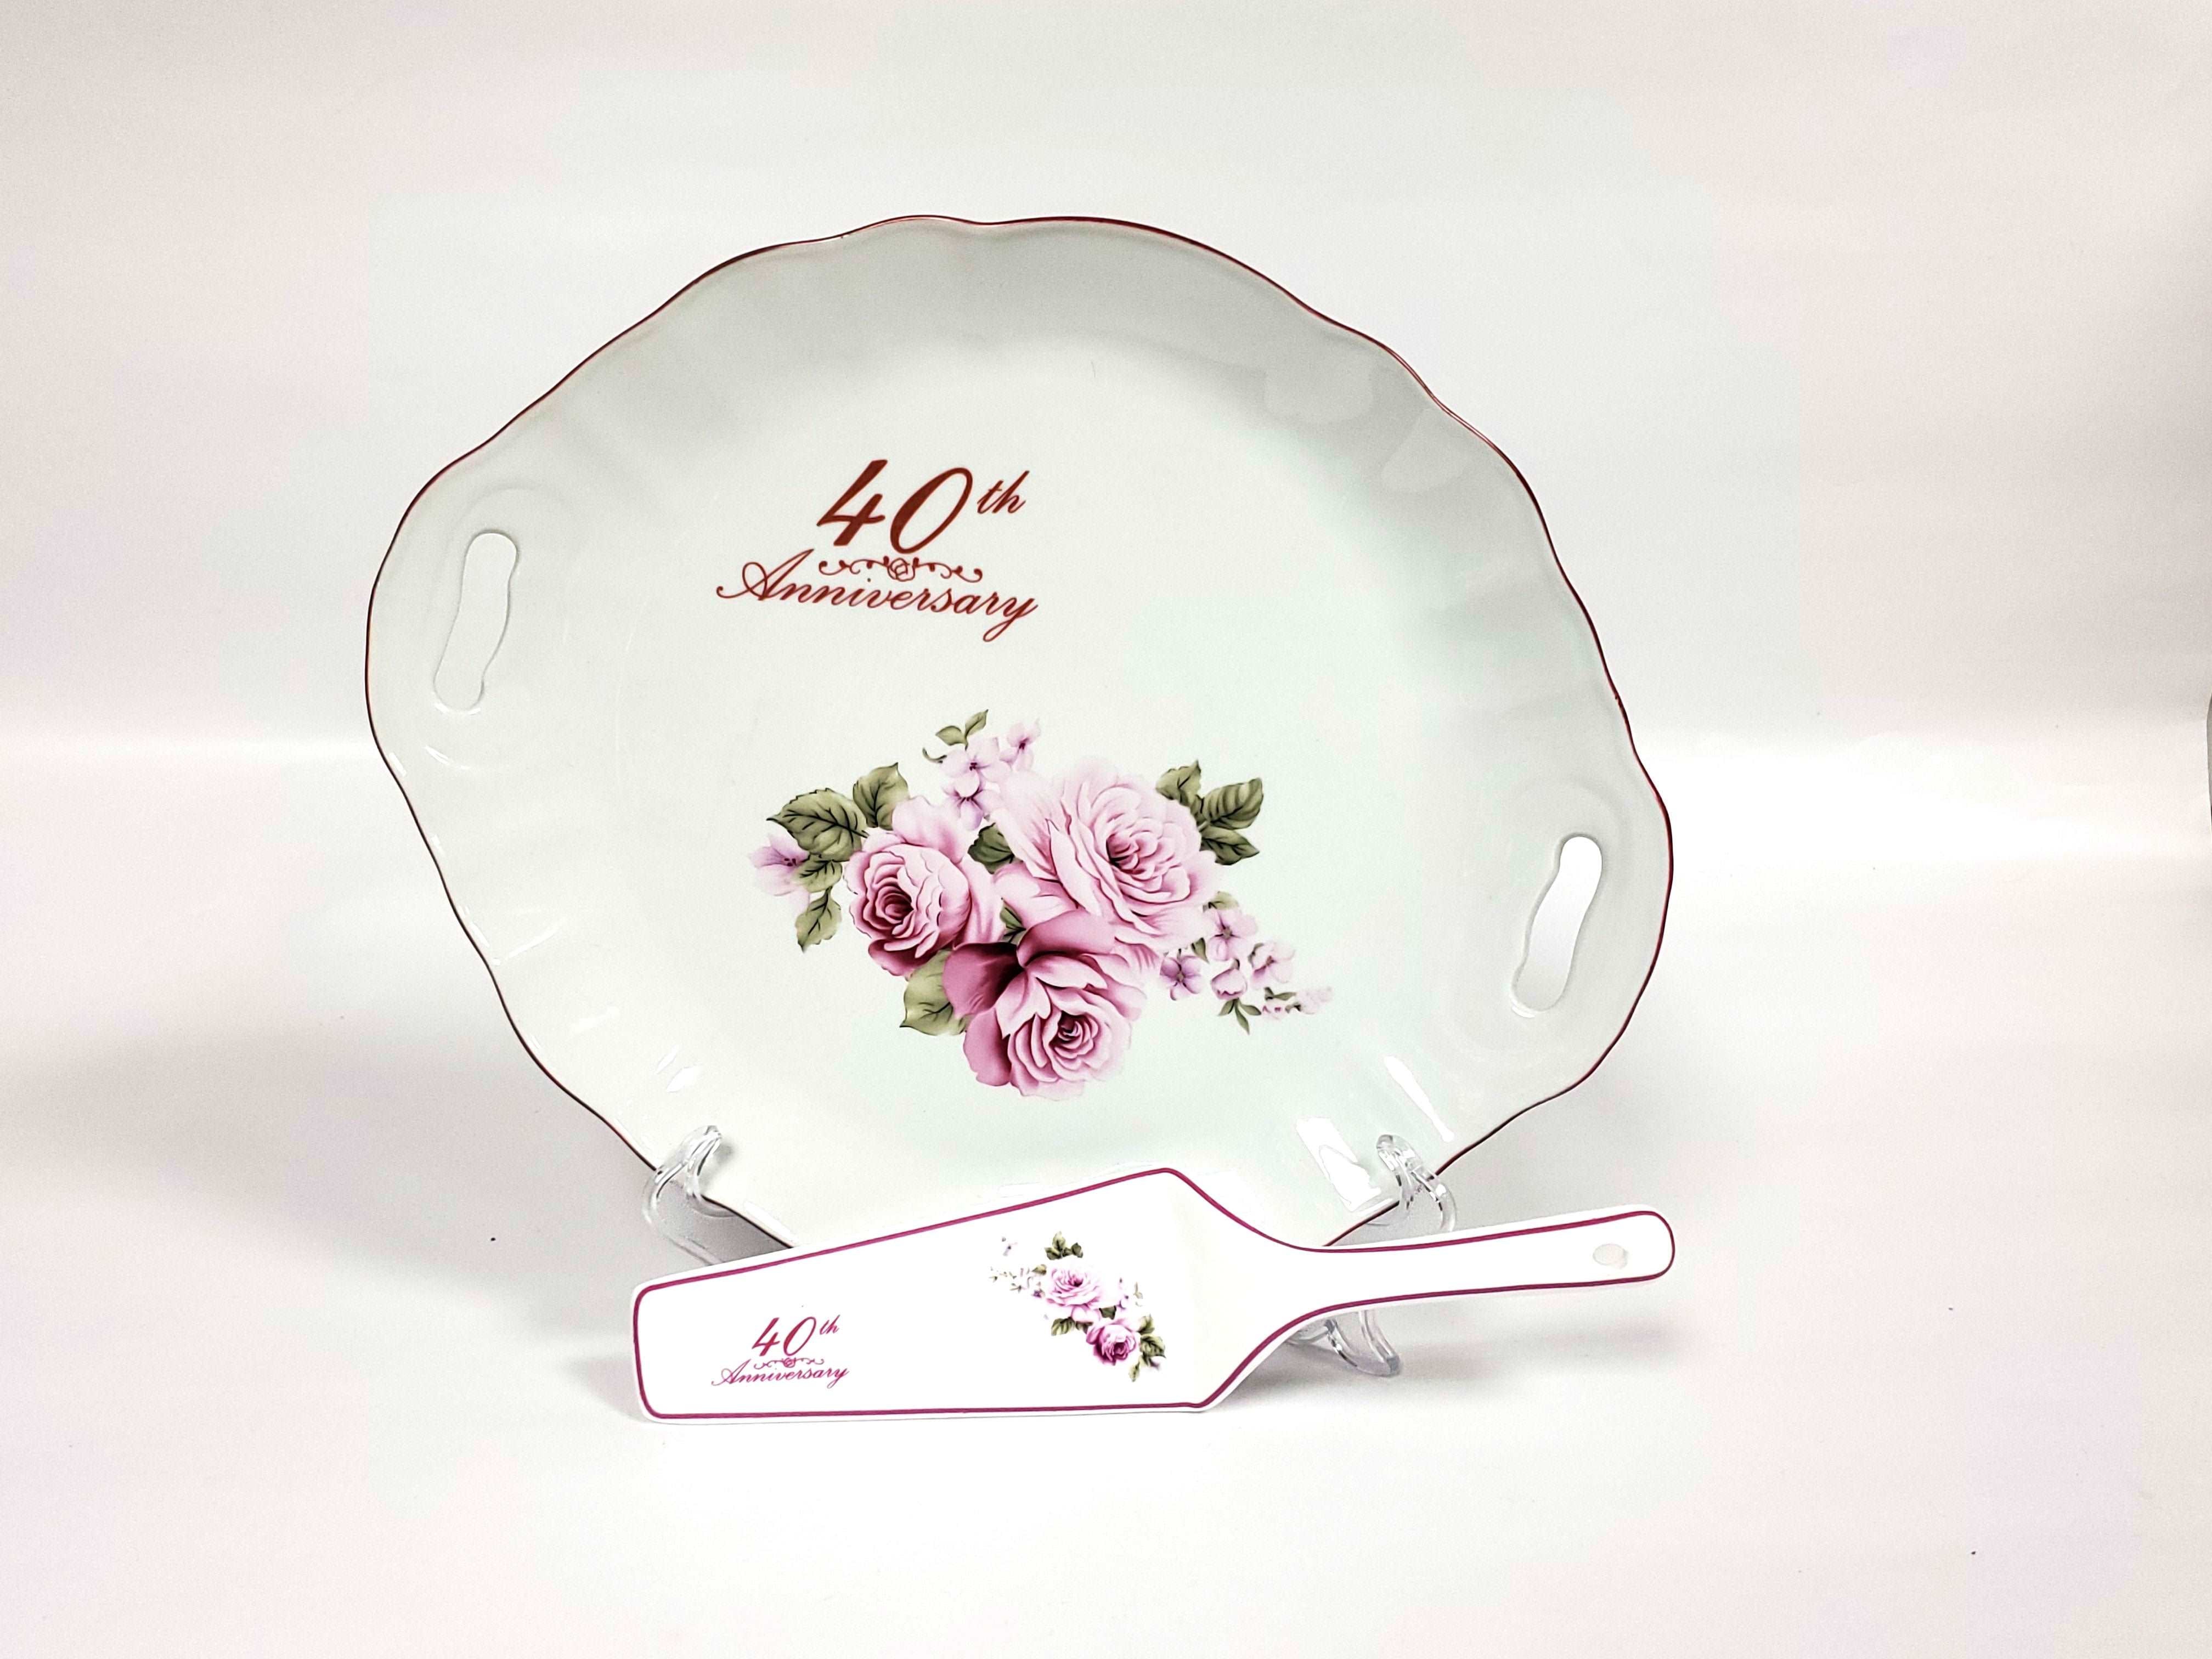 40th Anniversary Cake Platter and Serving Knife, Made of Porcelain - Royal Gift